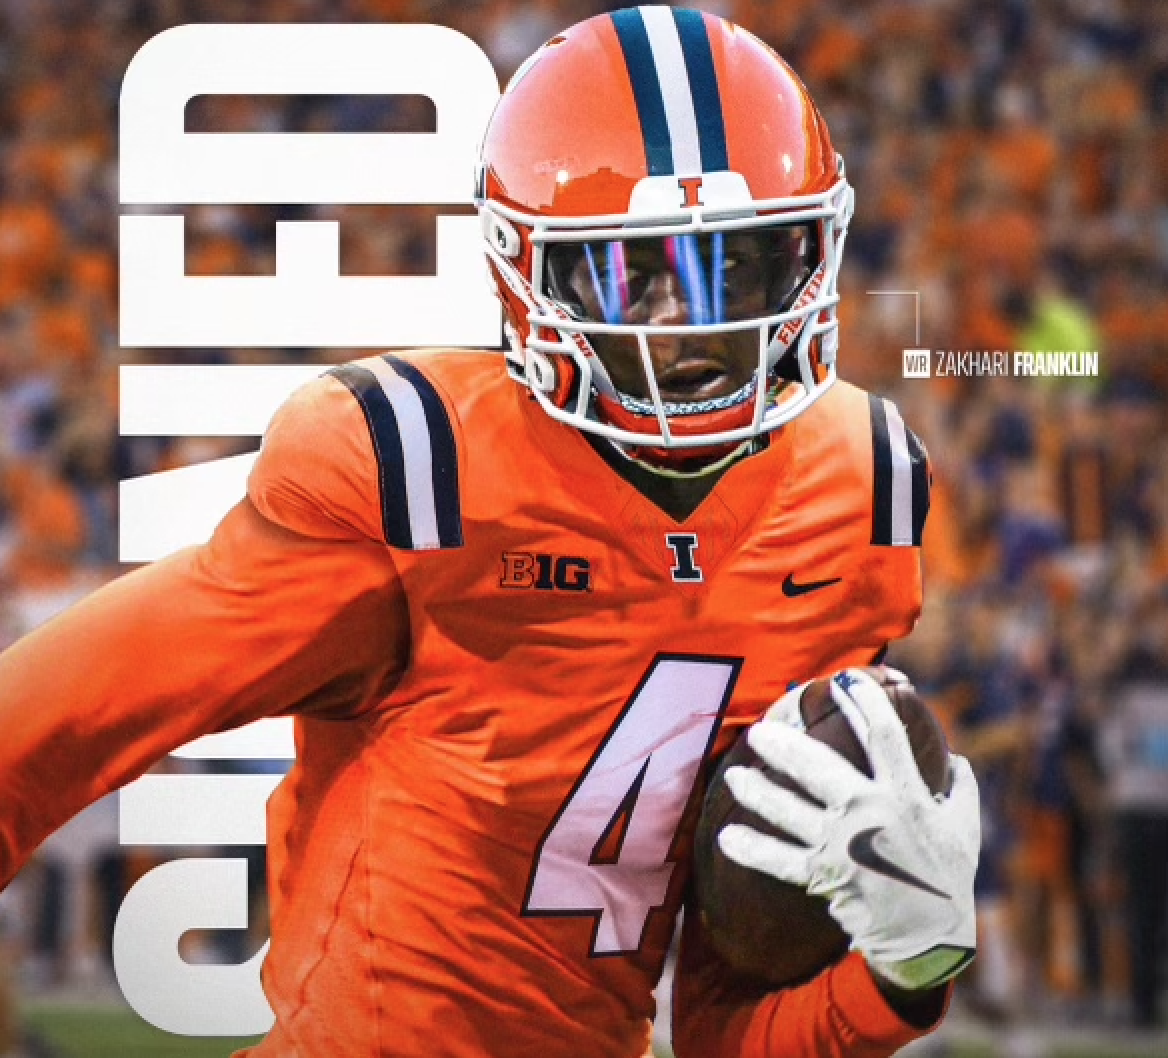 A picture of Zakhari Franklin photoshopped into an Illinois jersey. Franklin will join the Illini this fall as the NCAAs active receiving leader.